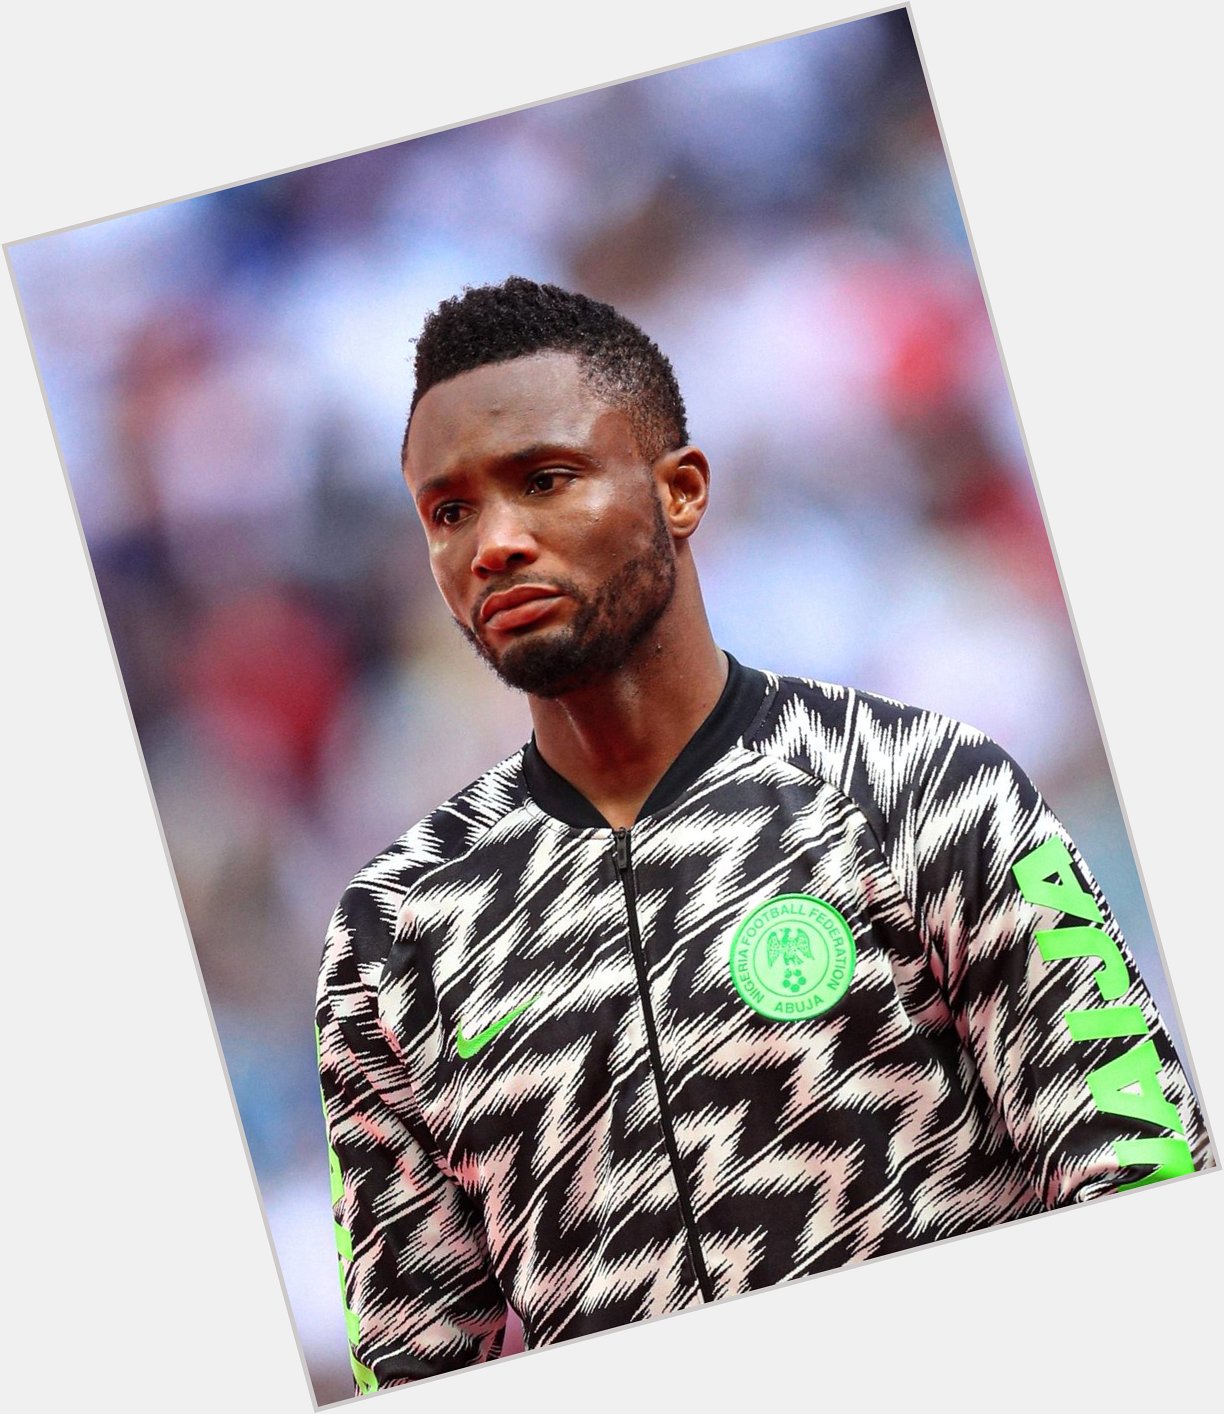 Happy birthday big bro Mikel Obi. More healthy and wealthy years ahead 